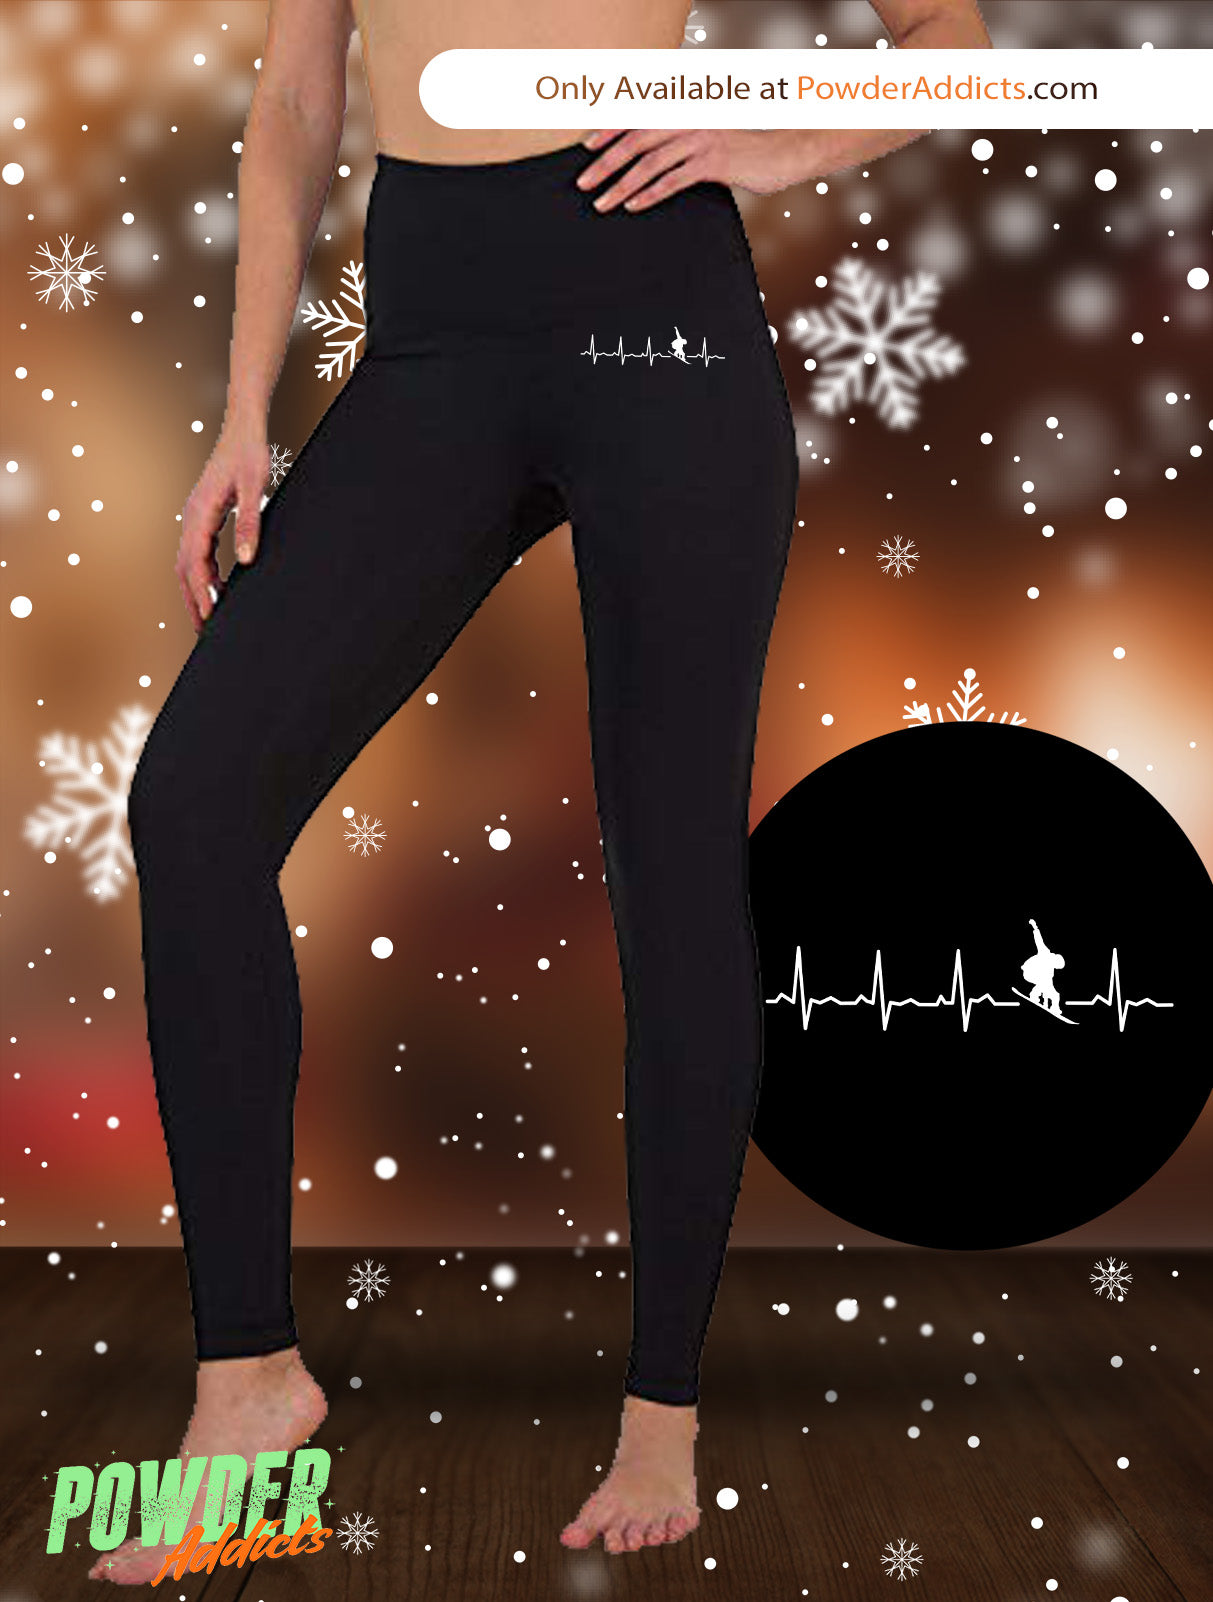 Snowboard is My Heartbeat Women's Embroidered Leggings - Powderaddicts